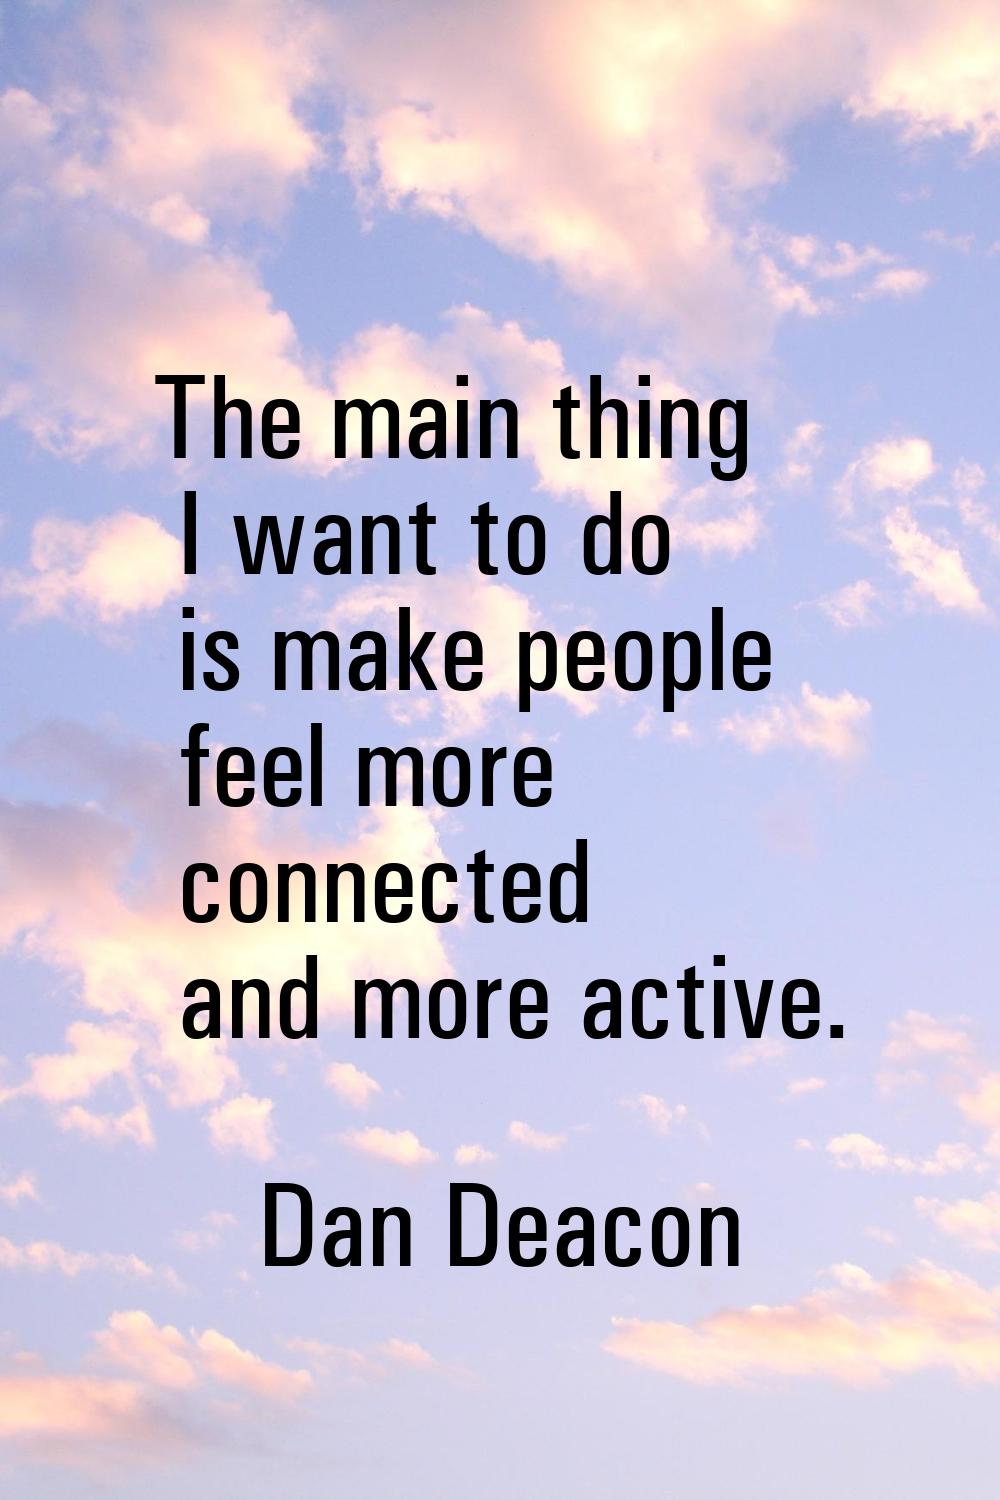 The main thing I want to do is make people feel more connected and more active.